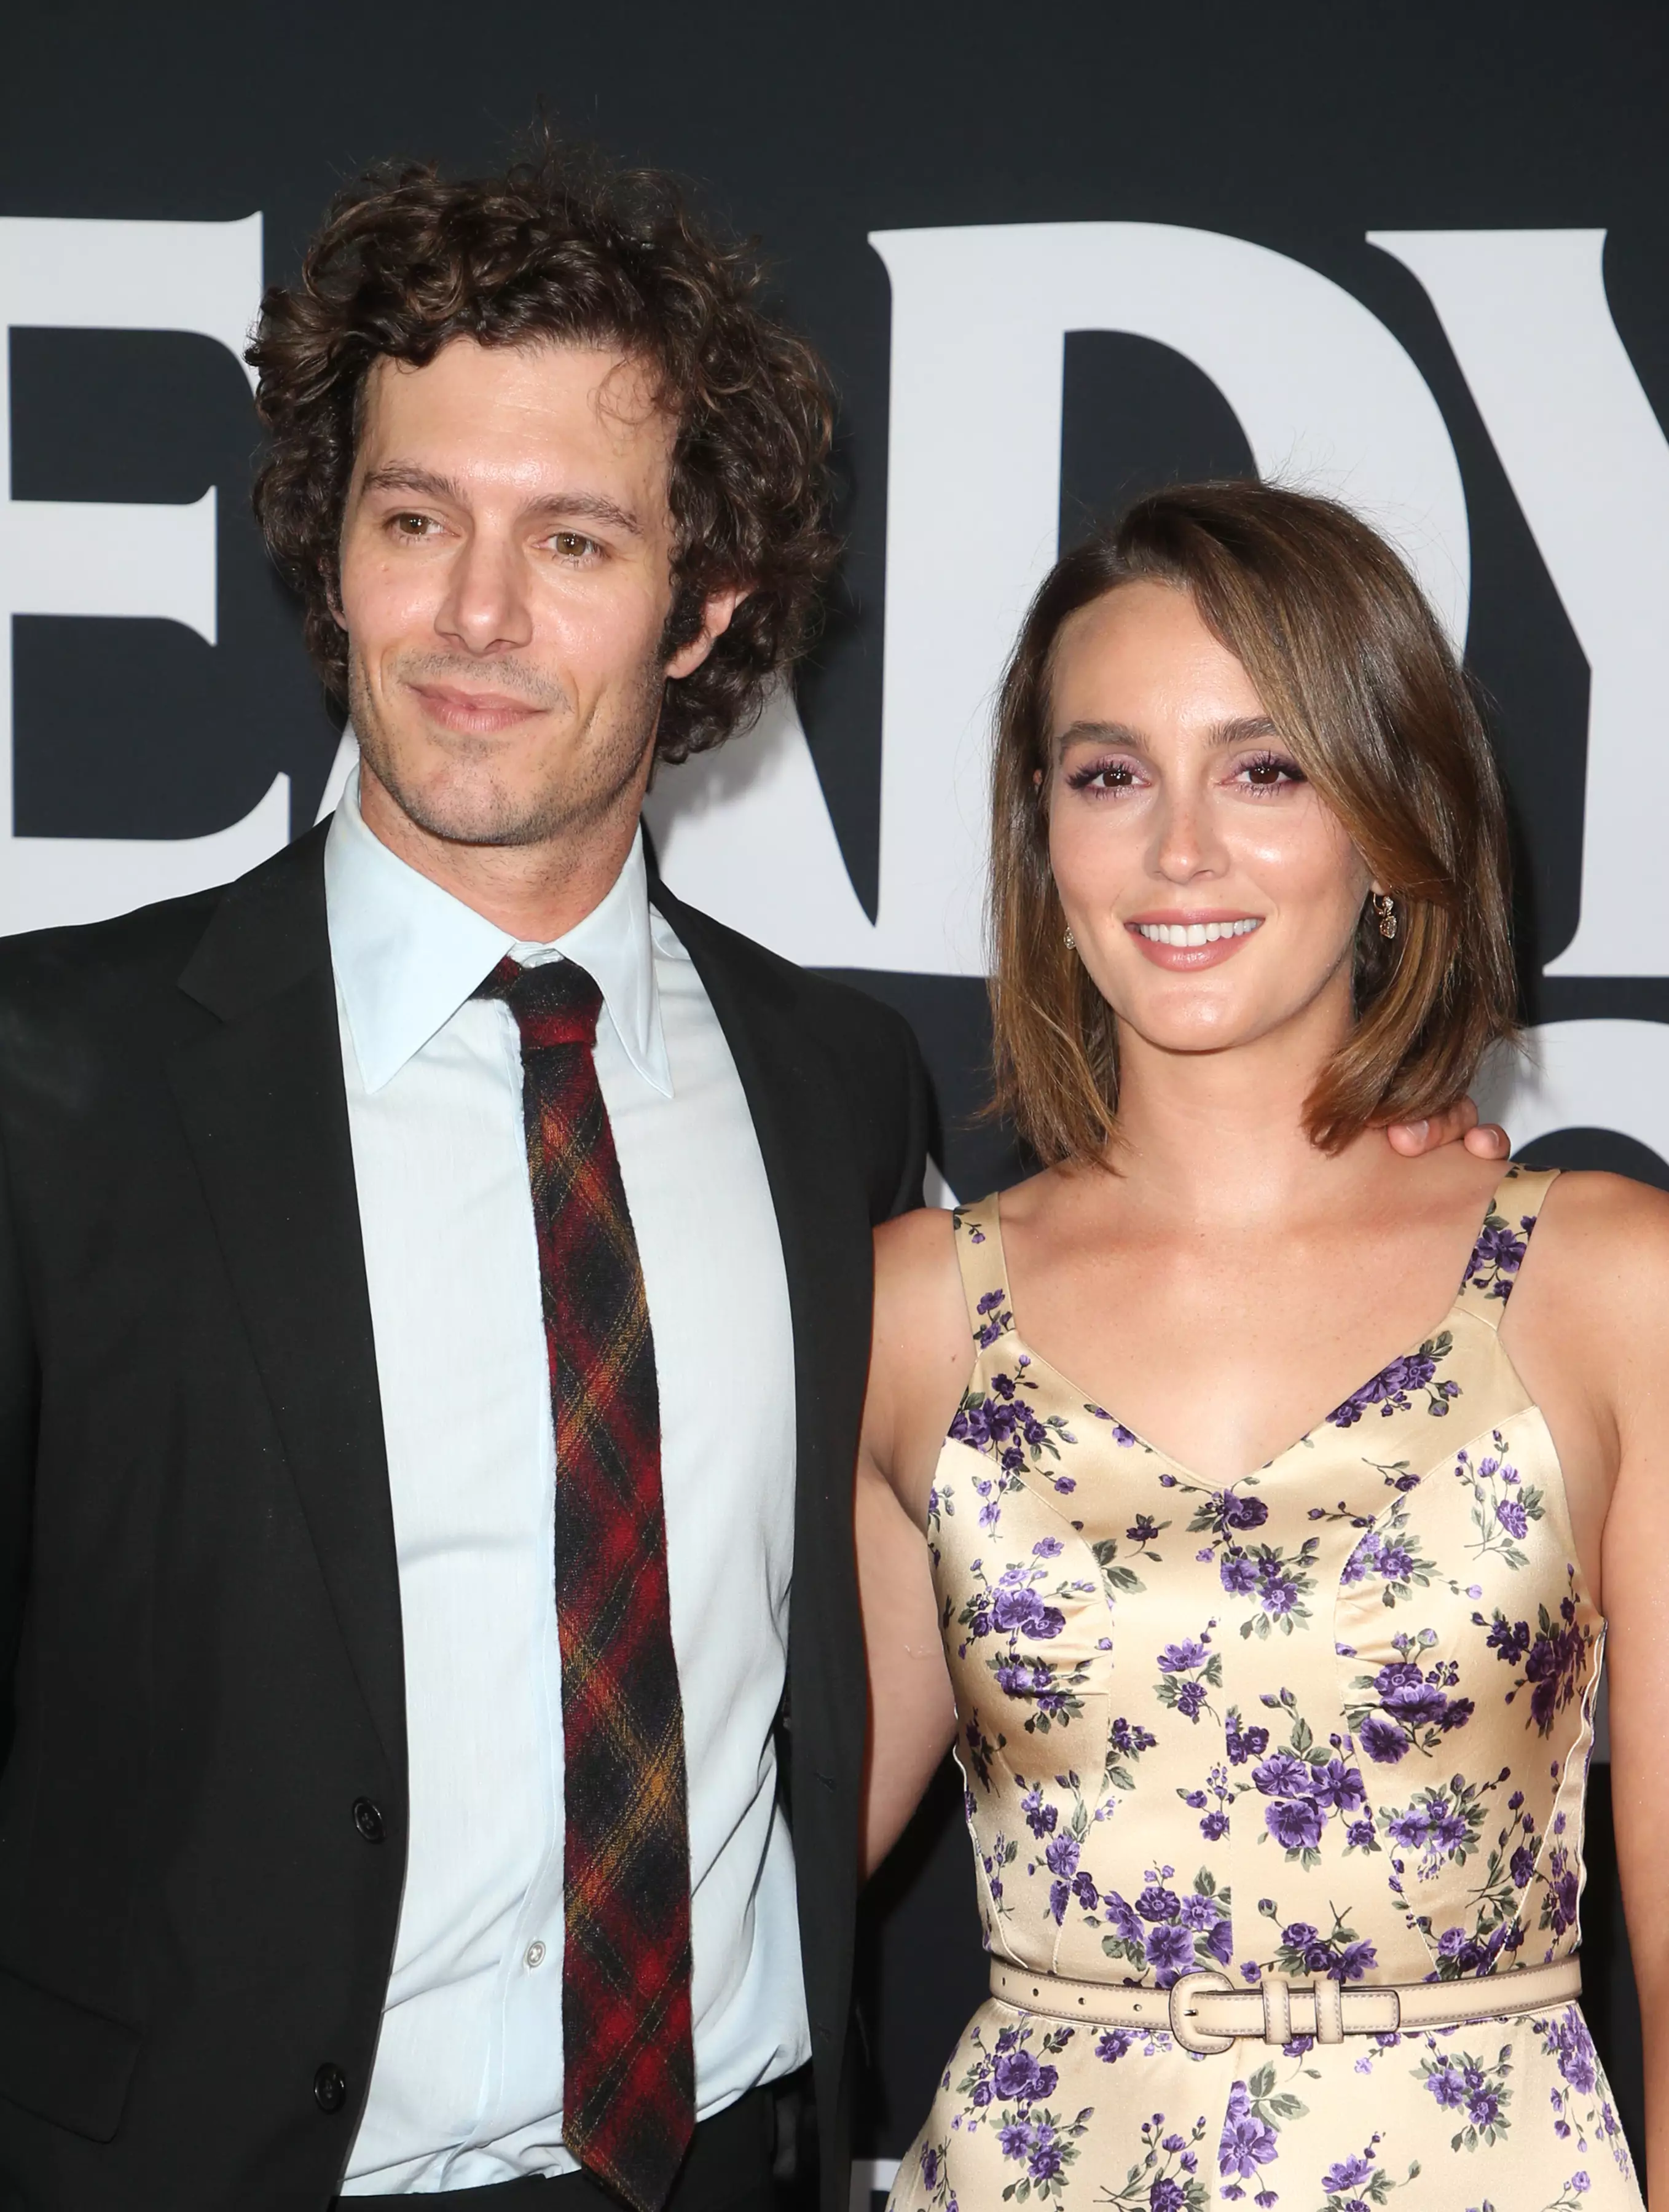 Many fans think Leighton Meester and Adam Brody look alike (